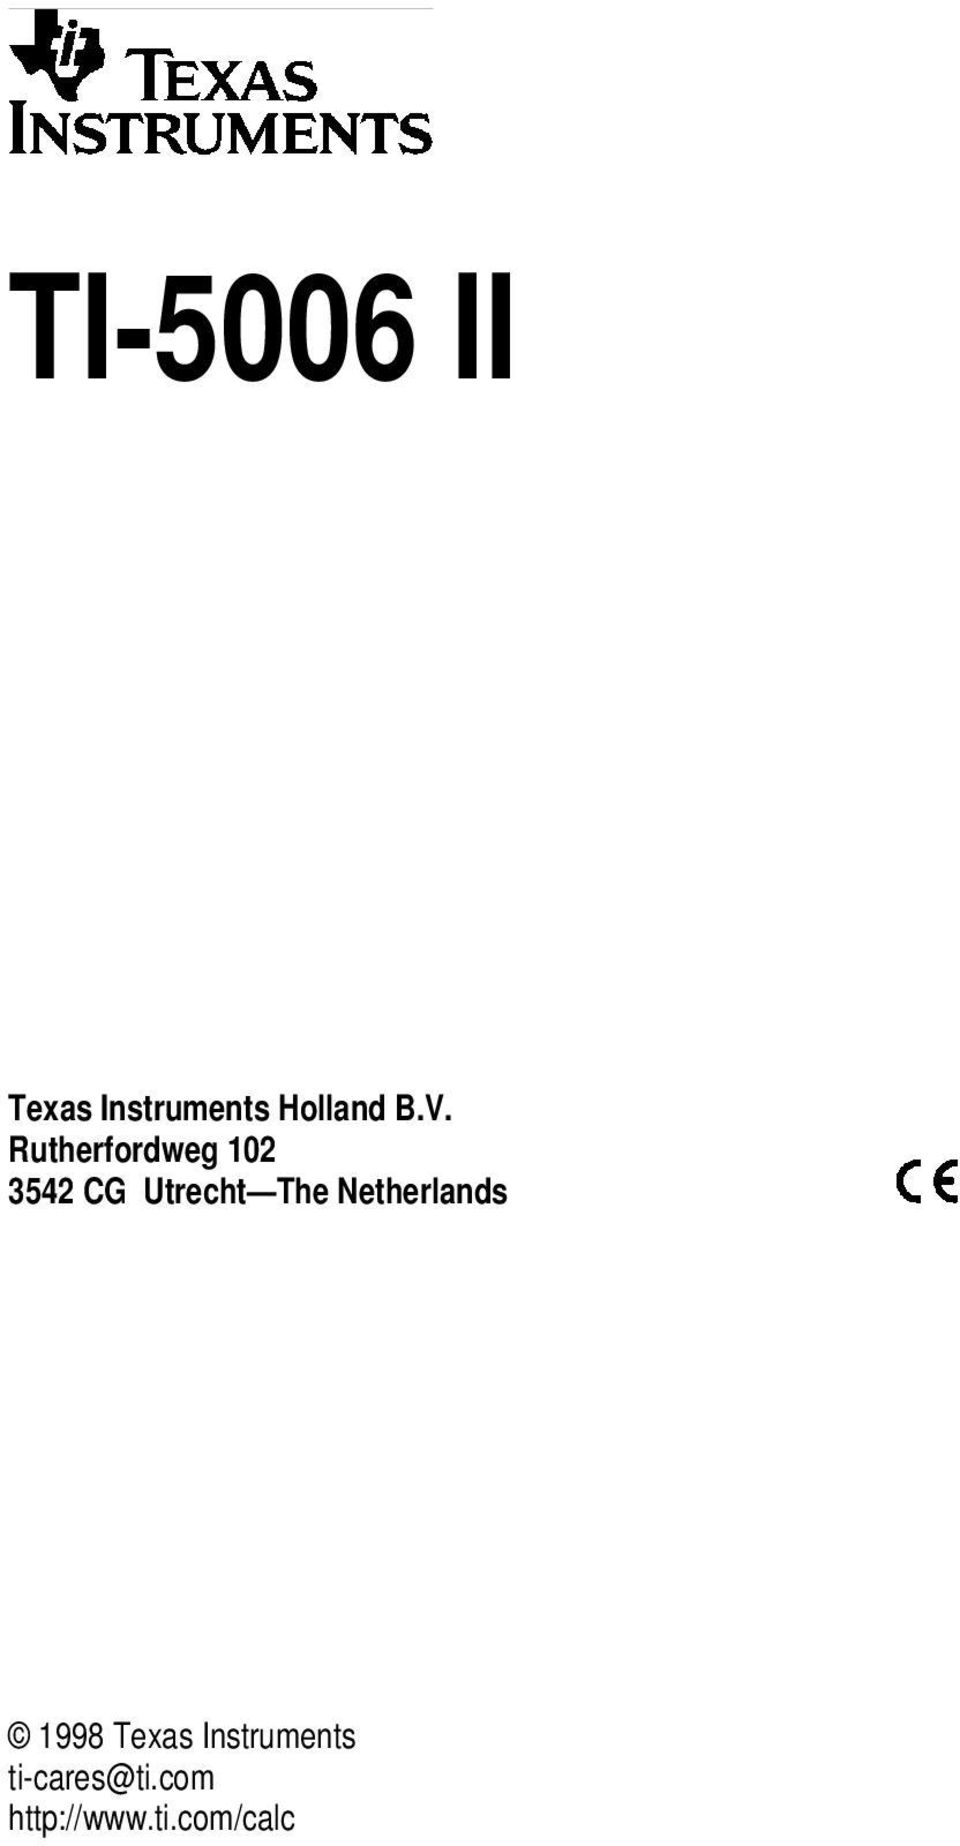 The Netherlands 1998 Texas Instruments